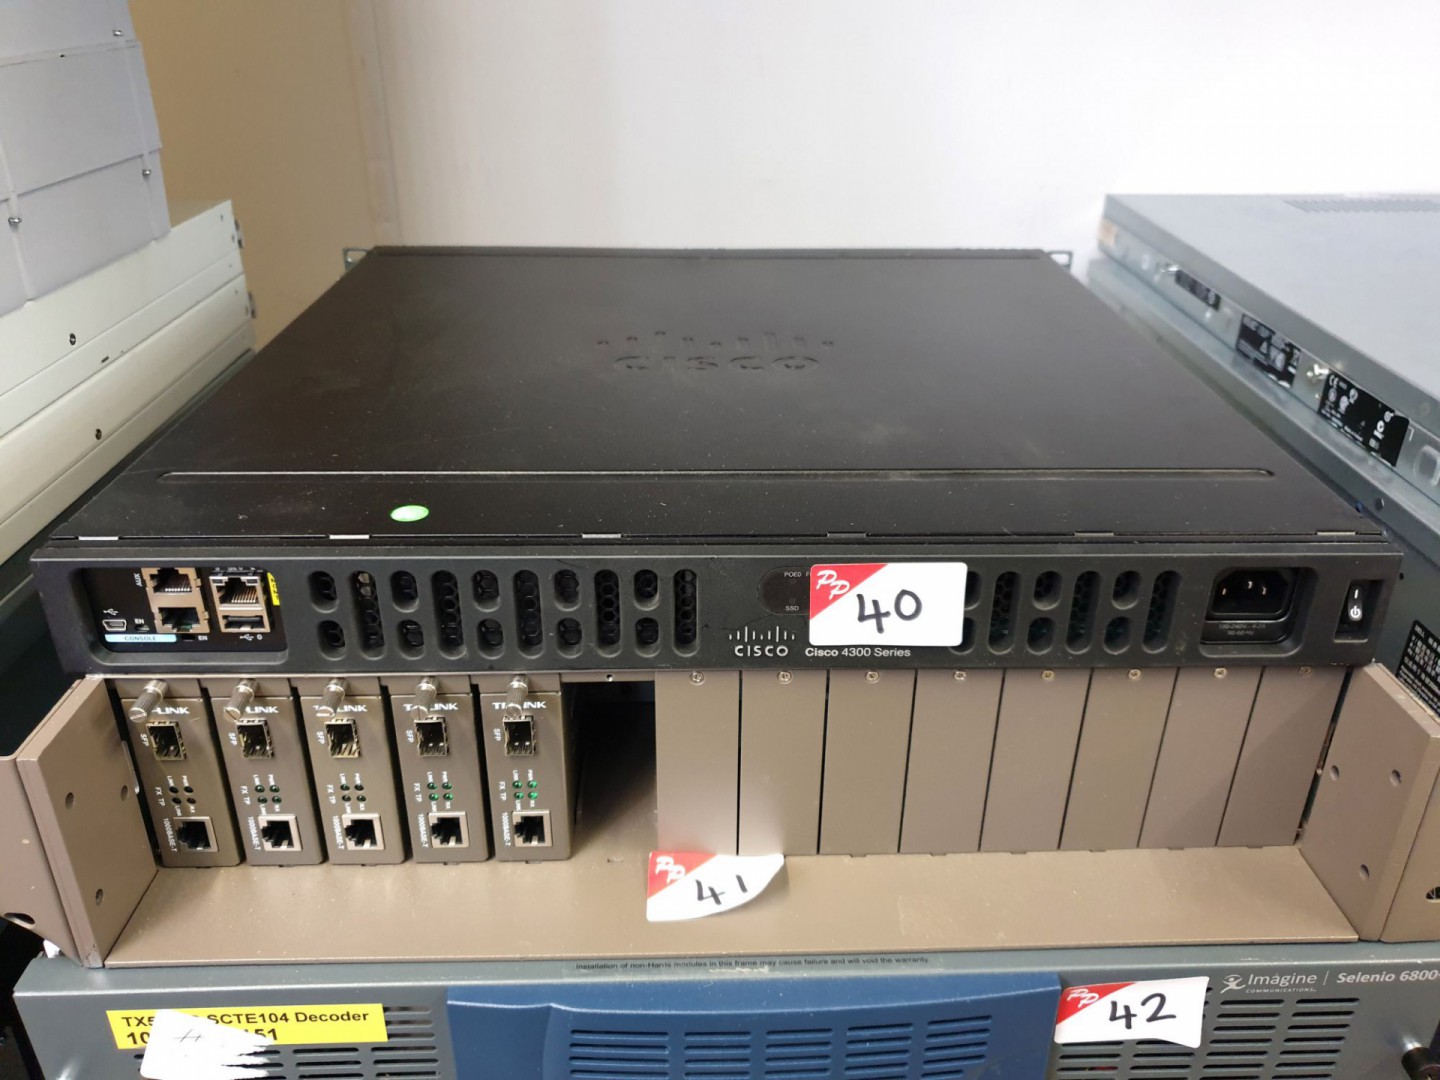 Cisco 4300 series ISR router